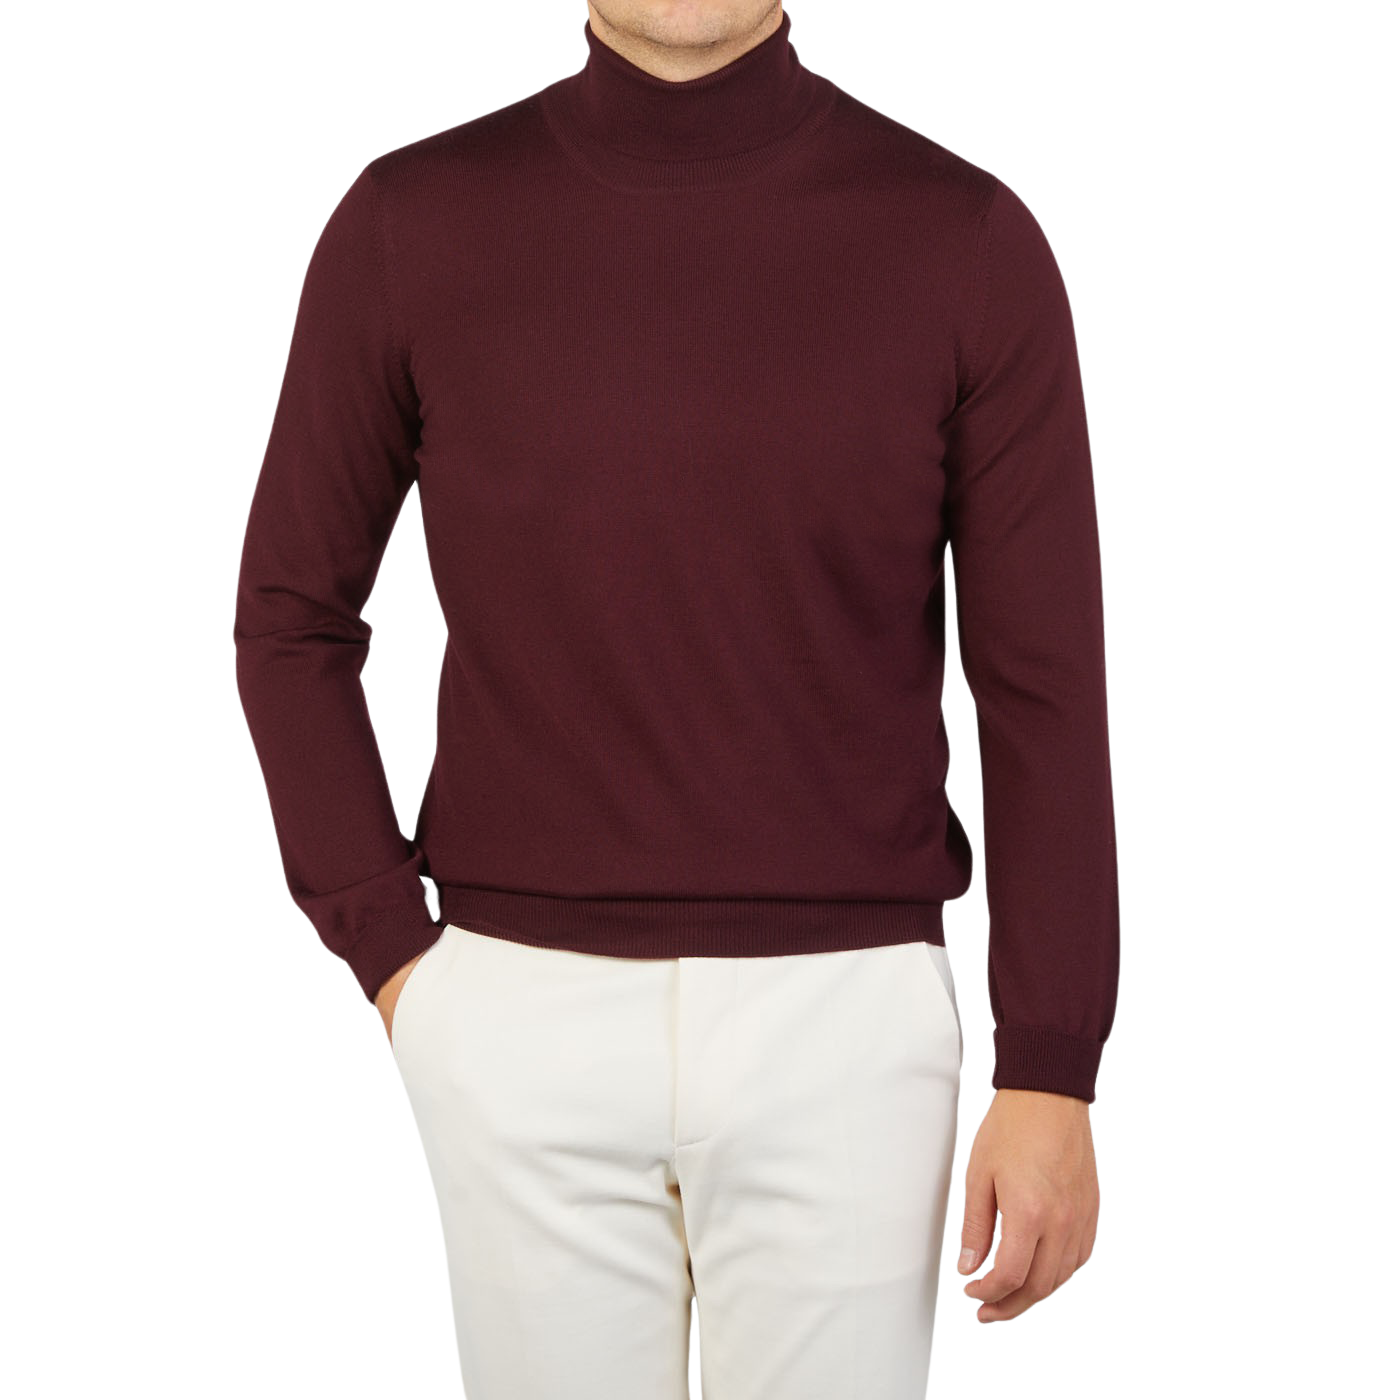 A man wearing a Wine Melange Extra Fine Merino Roll Neck sweater by Gran Sasso in super soft extra fine wool.